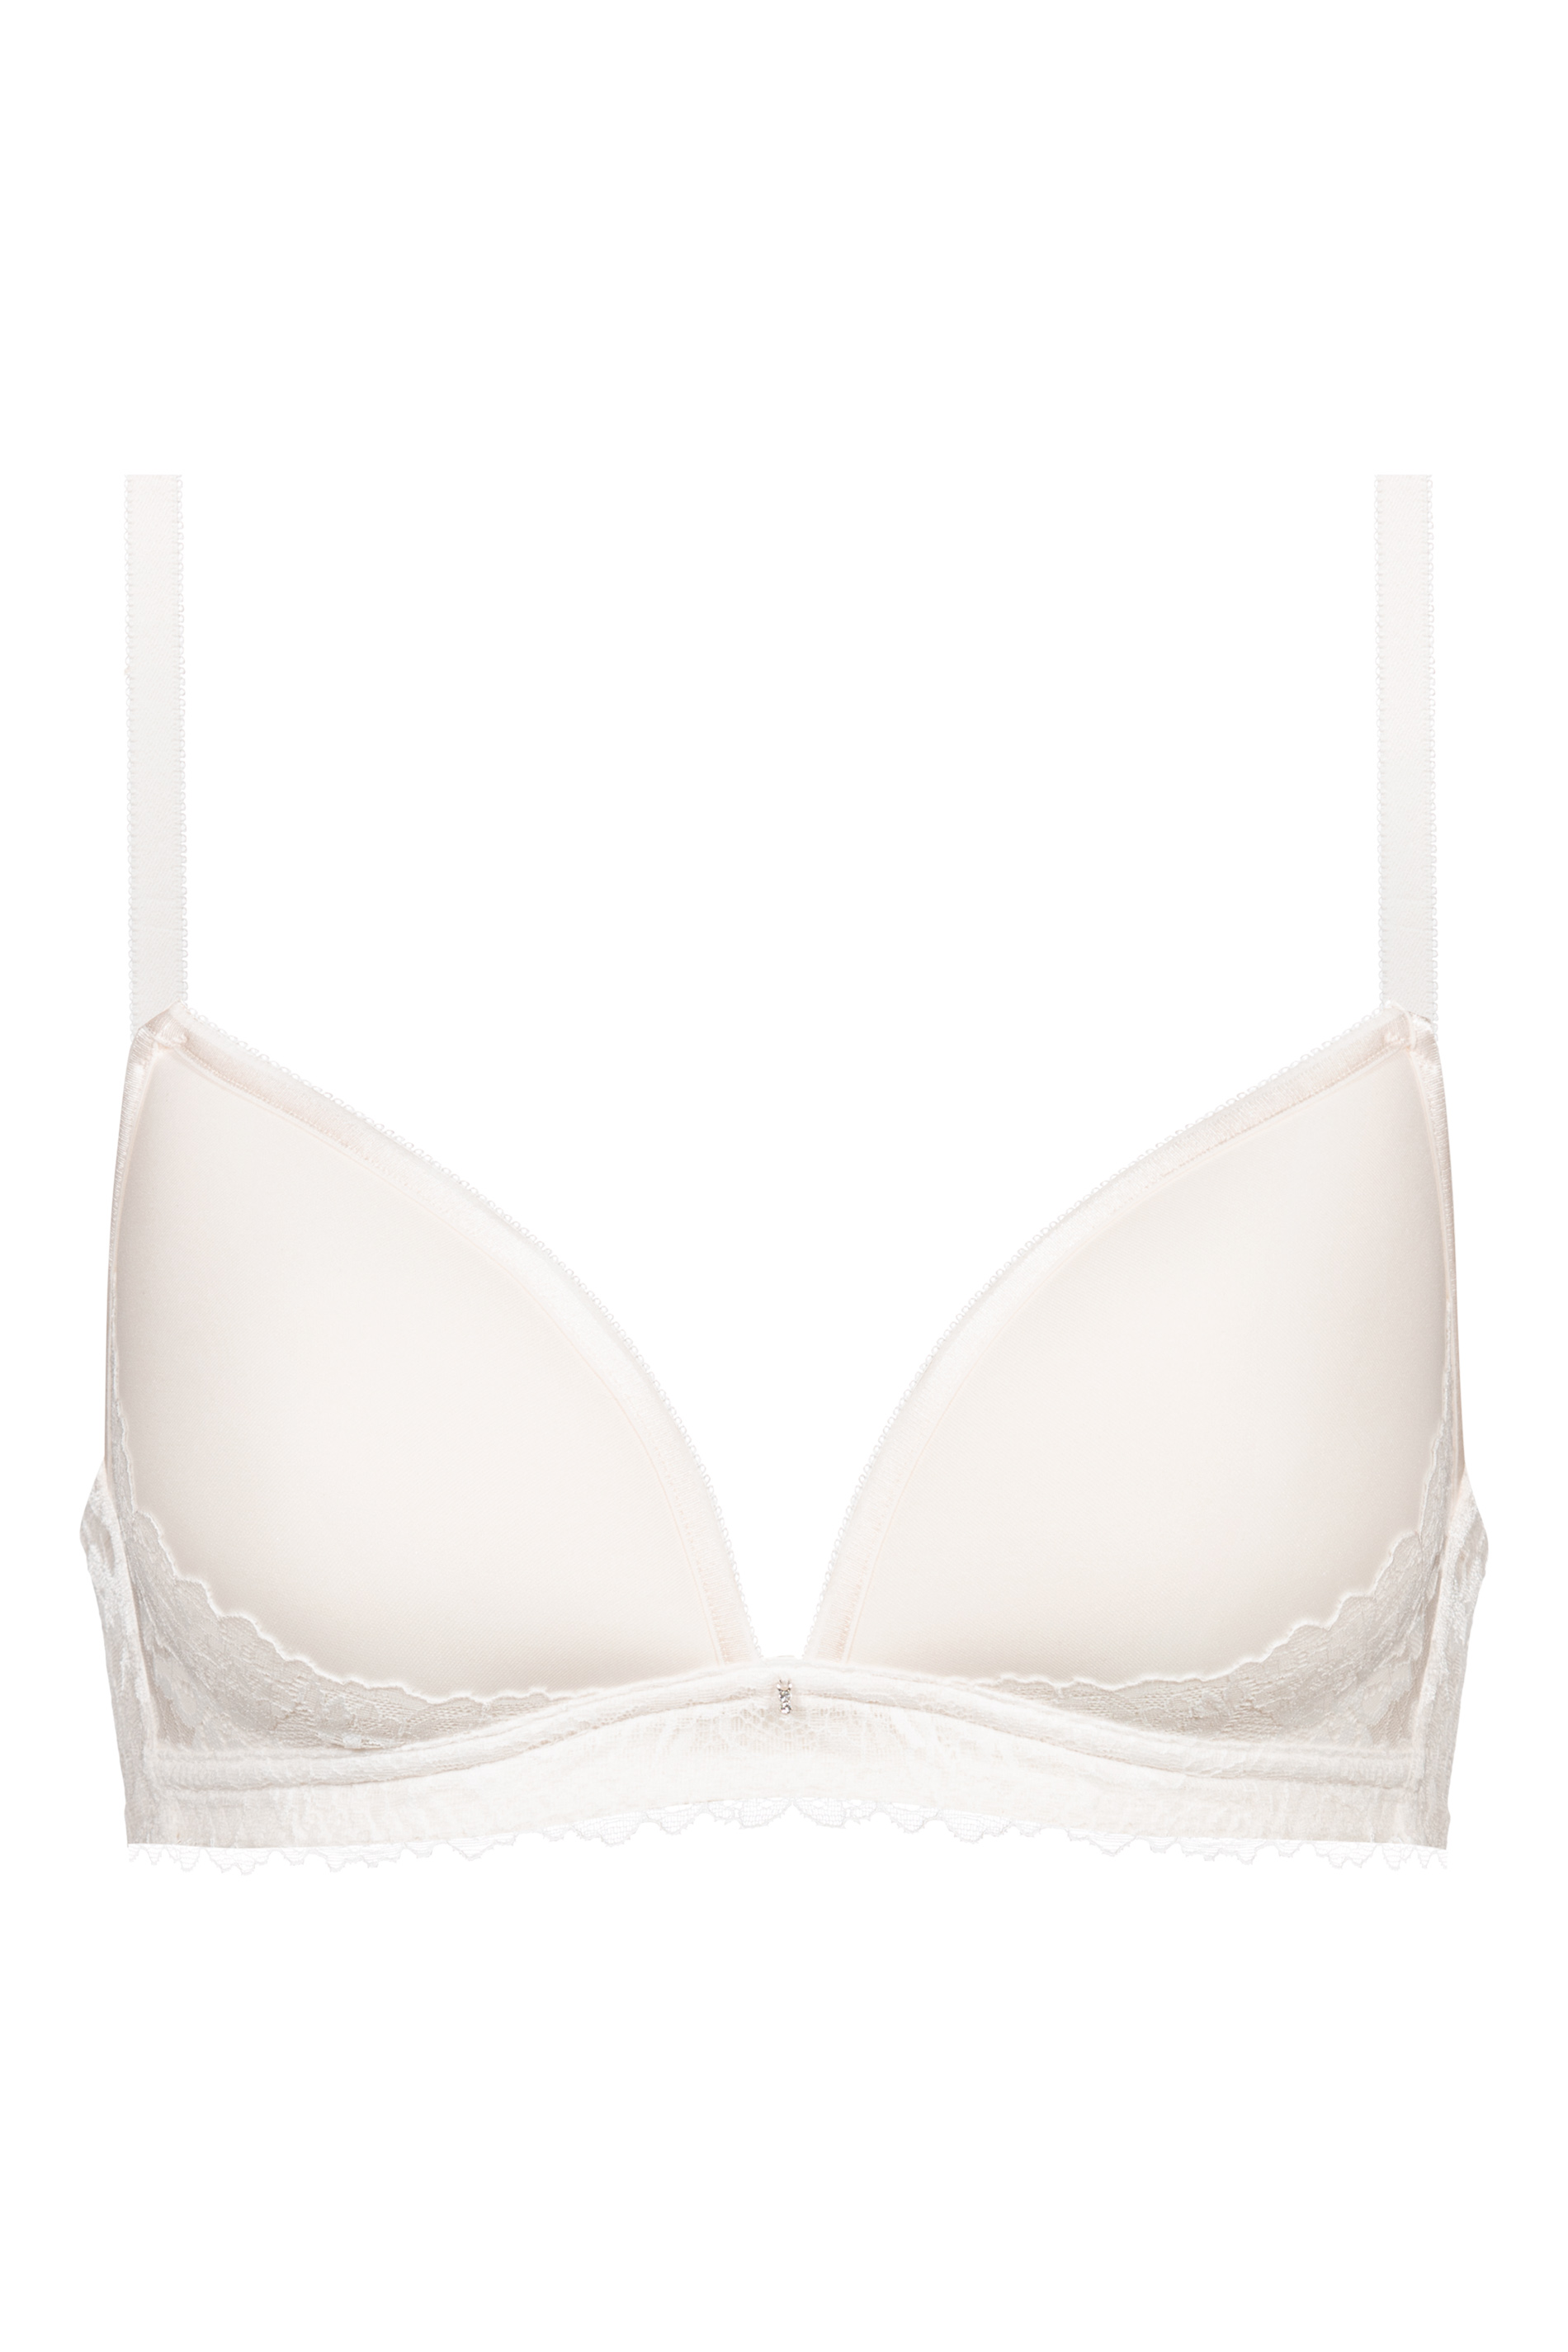 Spacer bra | no underwire Champagner Serie Luxurious Cut Out | mey®